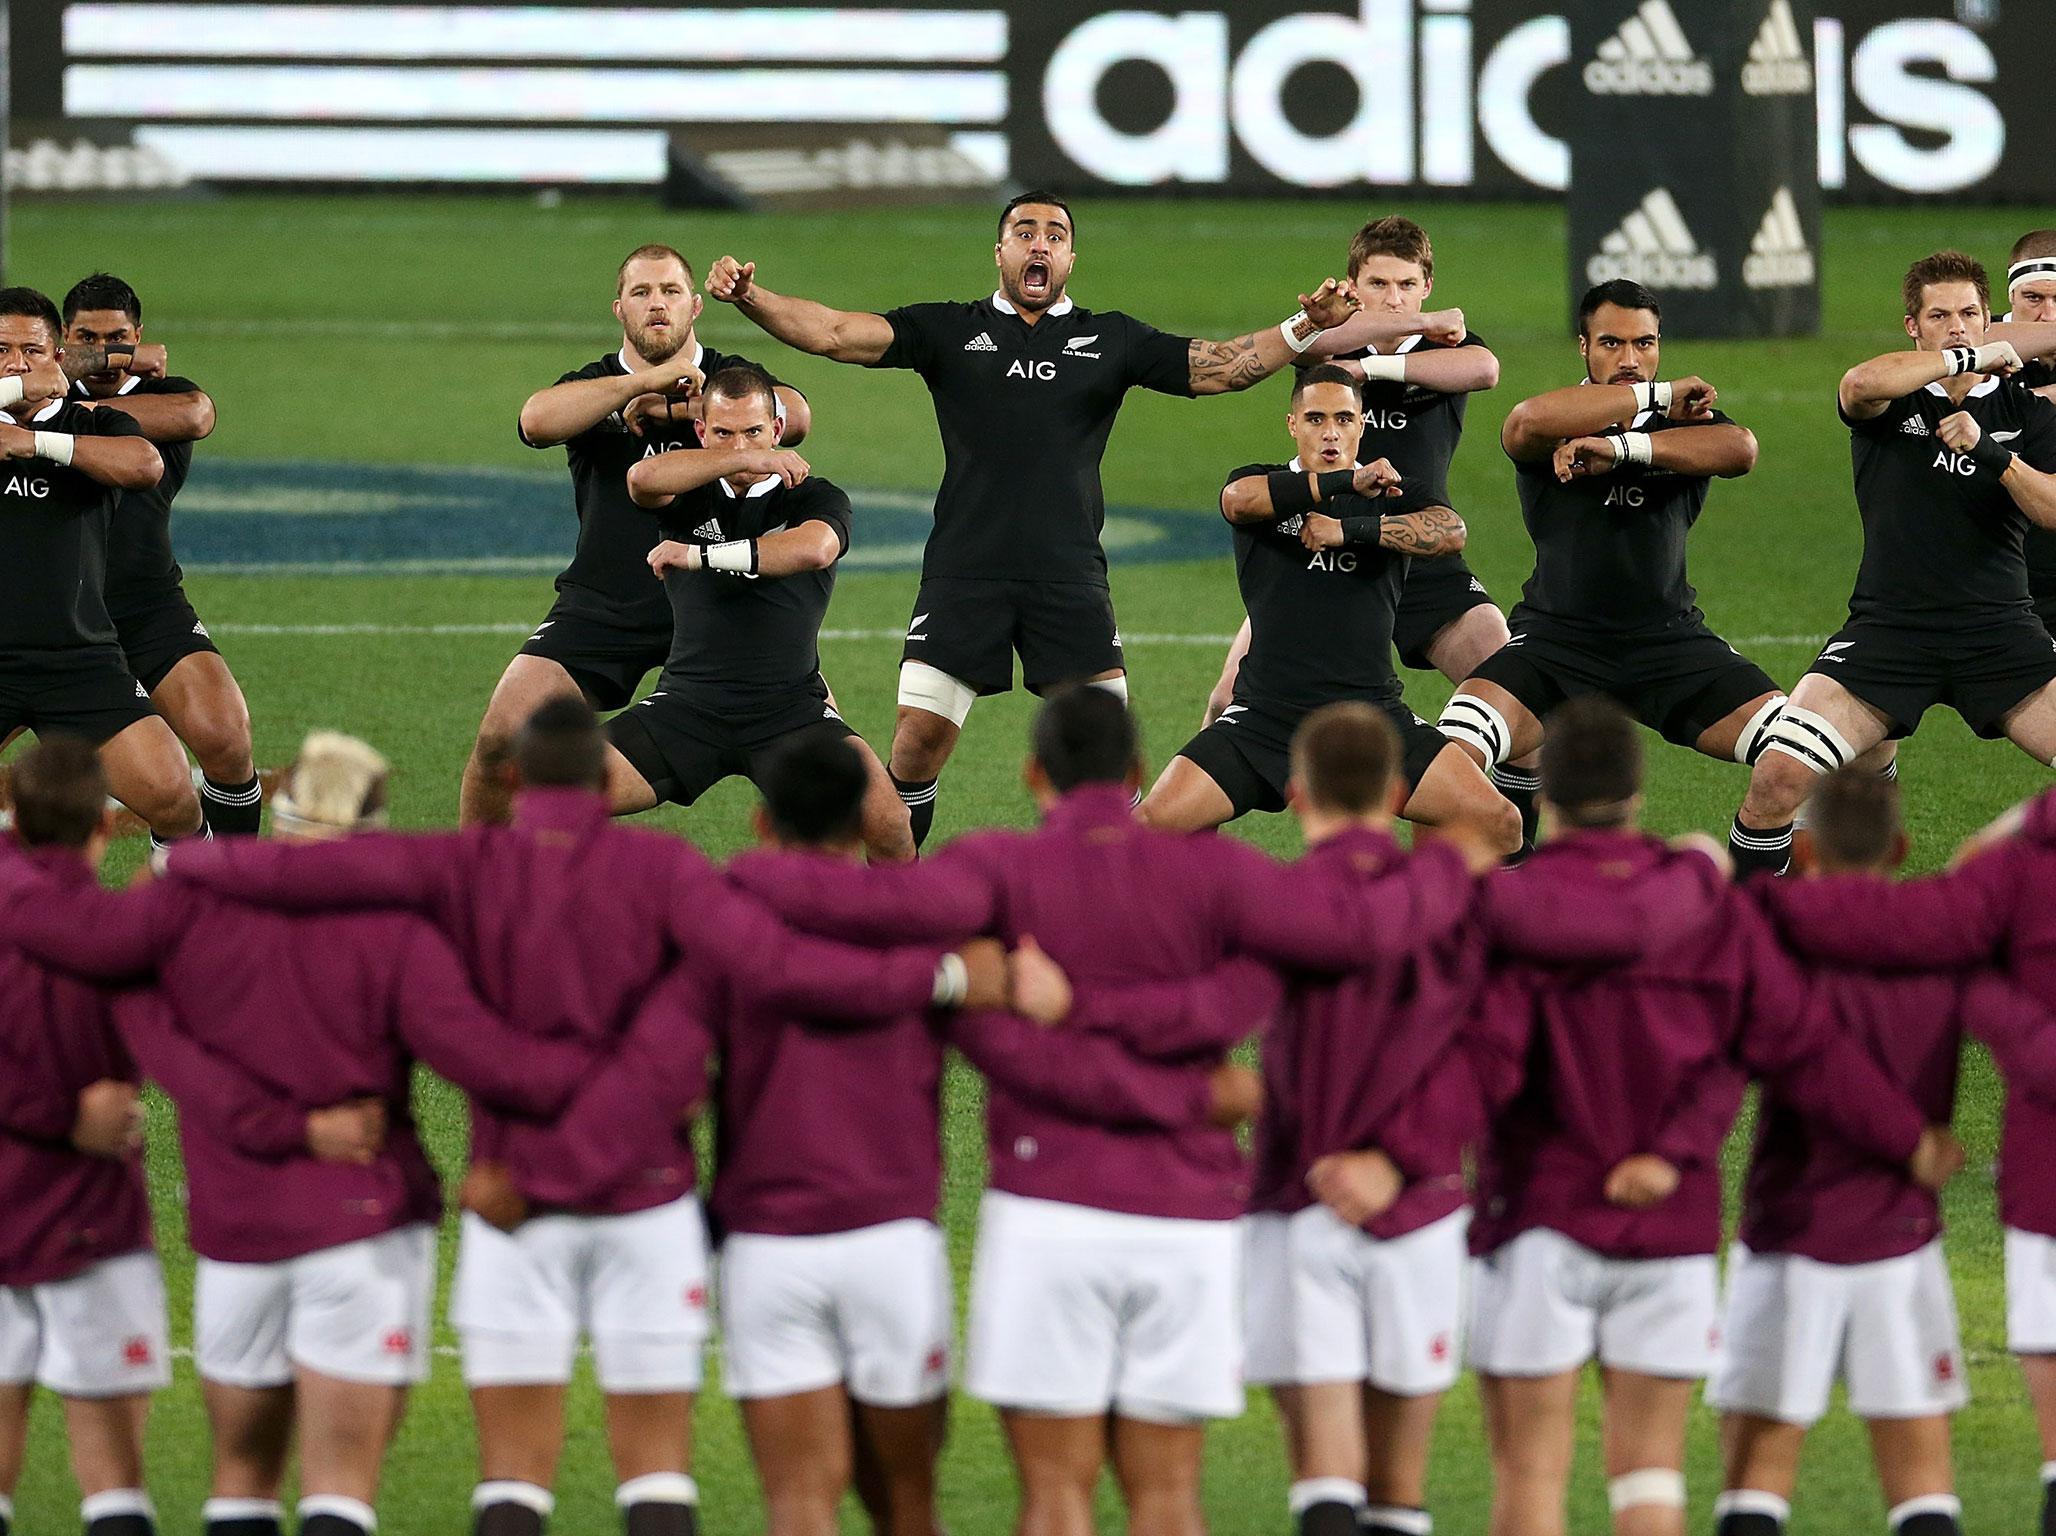 England will finally face New Zealand again in 2018